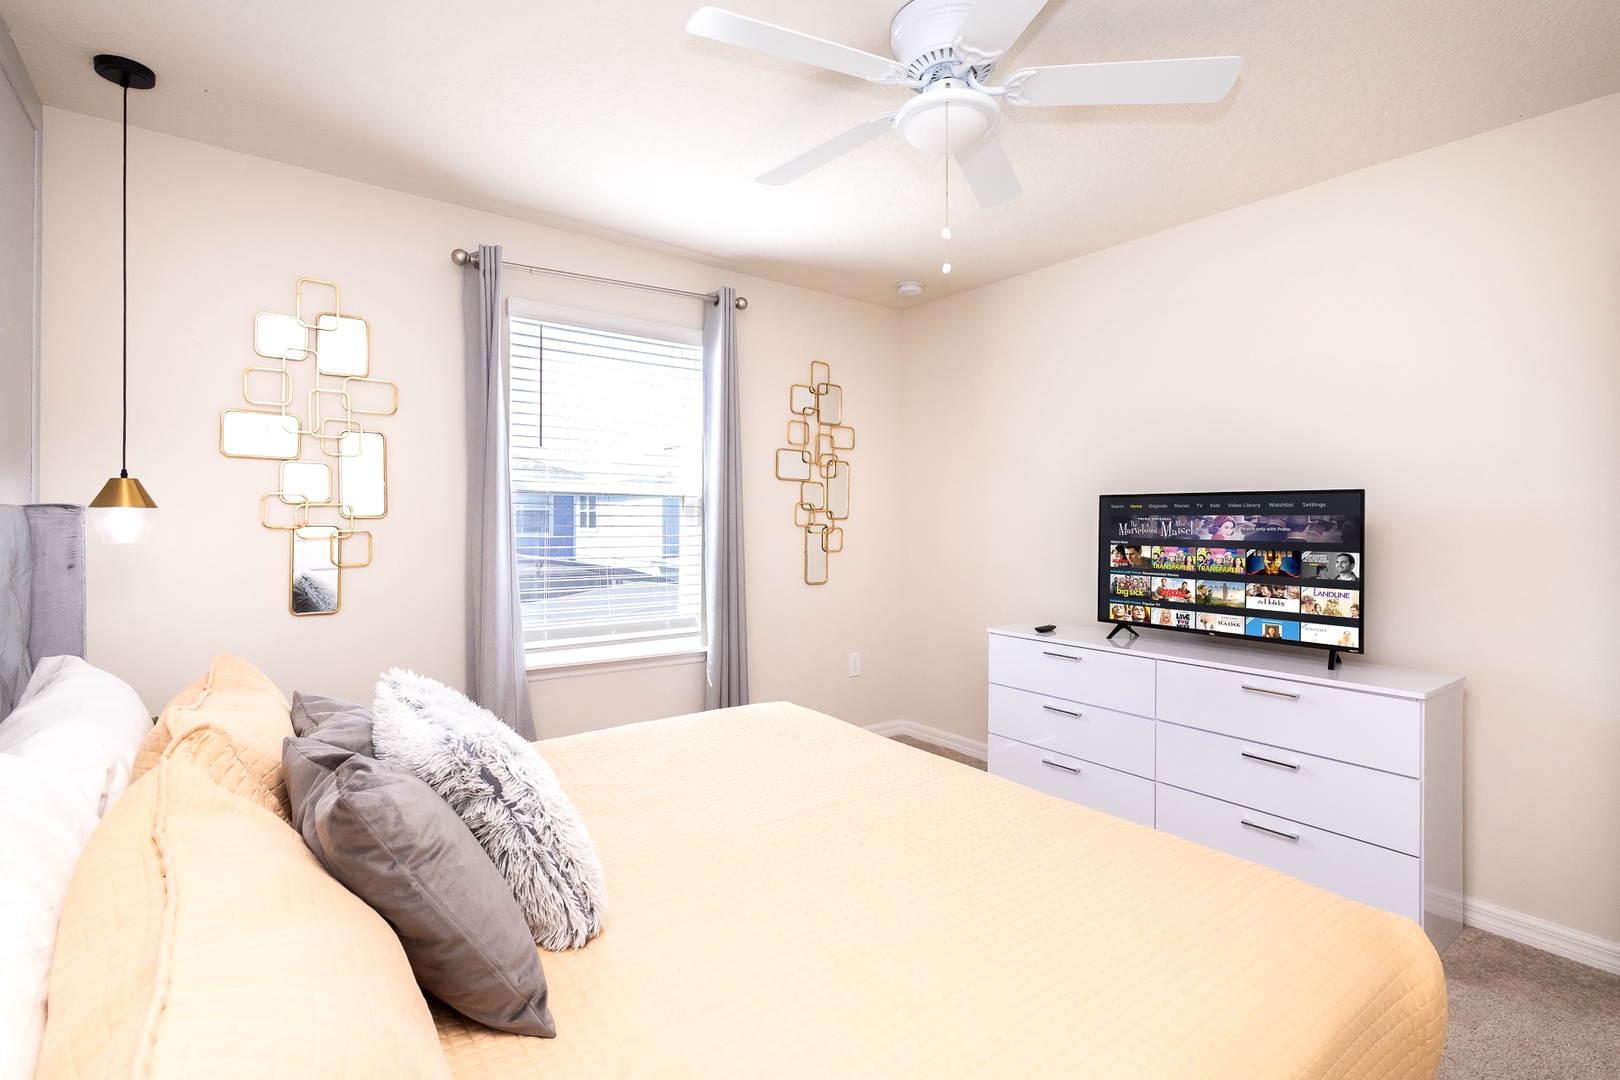 The final bedroom on the 2nd floor offers a king bed, ceiling fan, & Smart TV